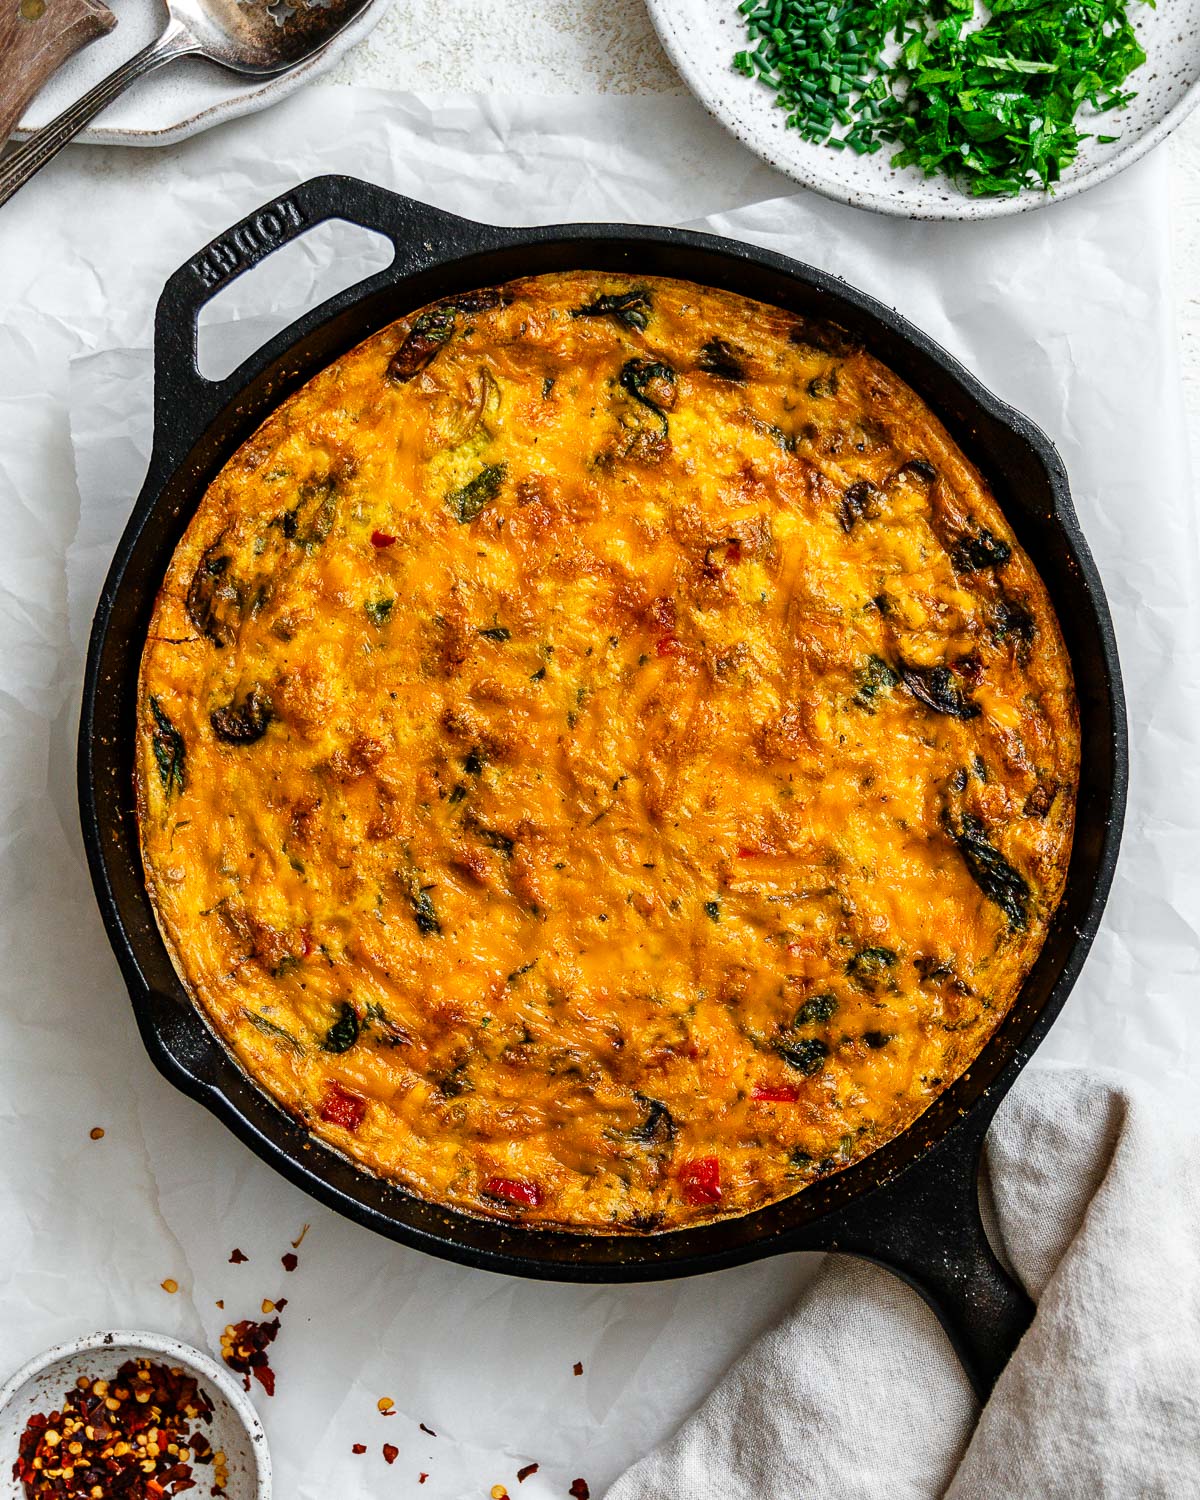 completed Vegan Just Egg Frittata in a skillet against a white surface